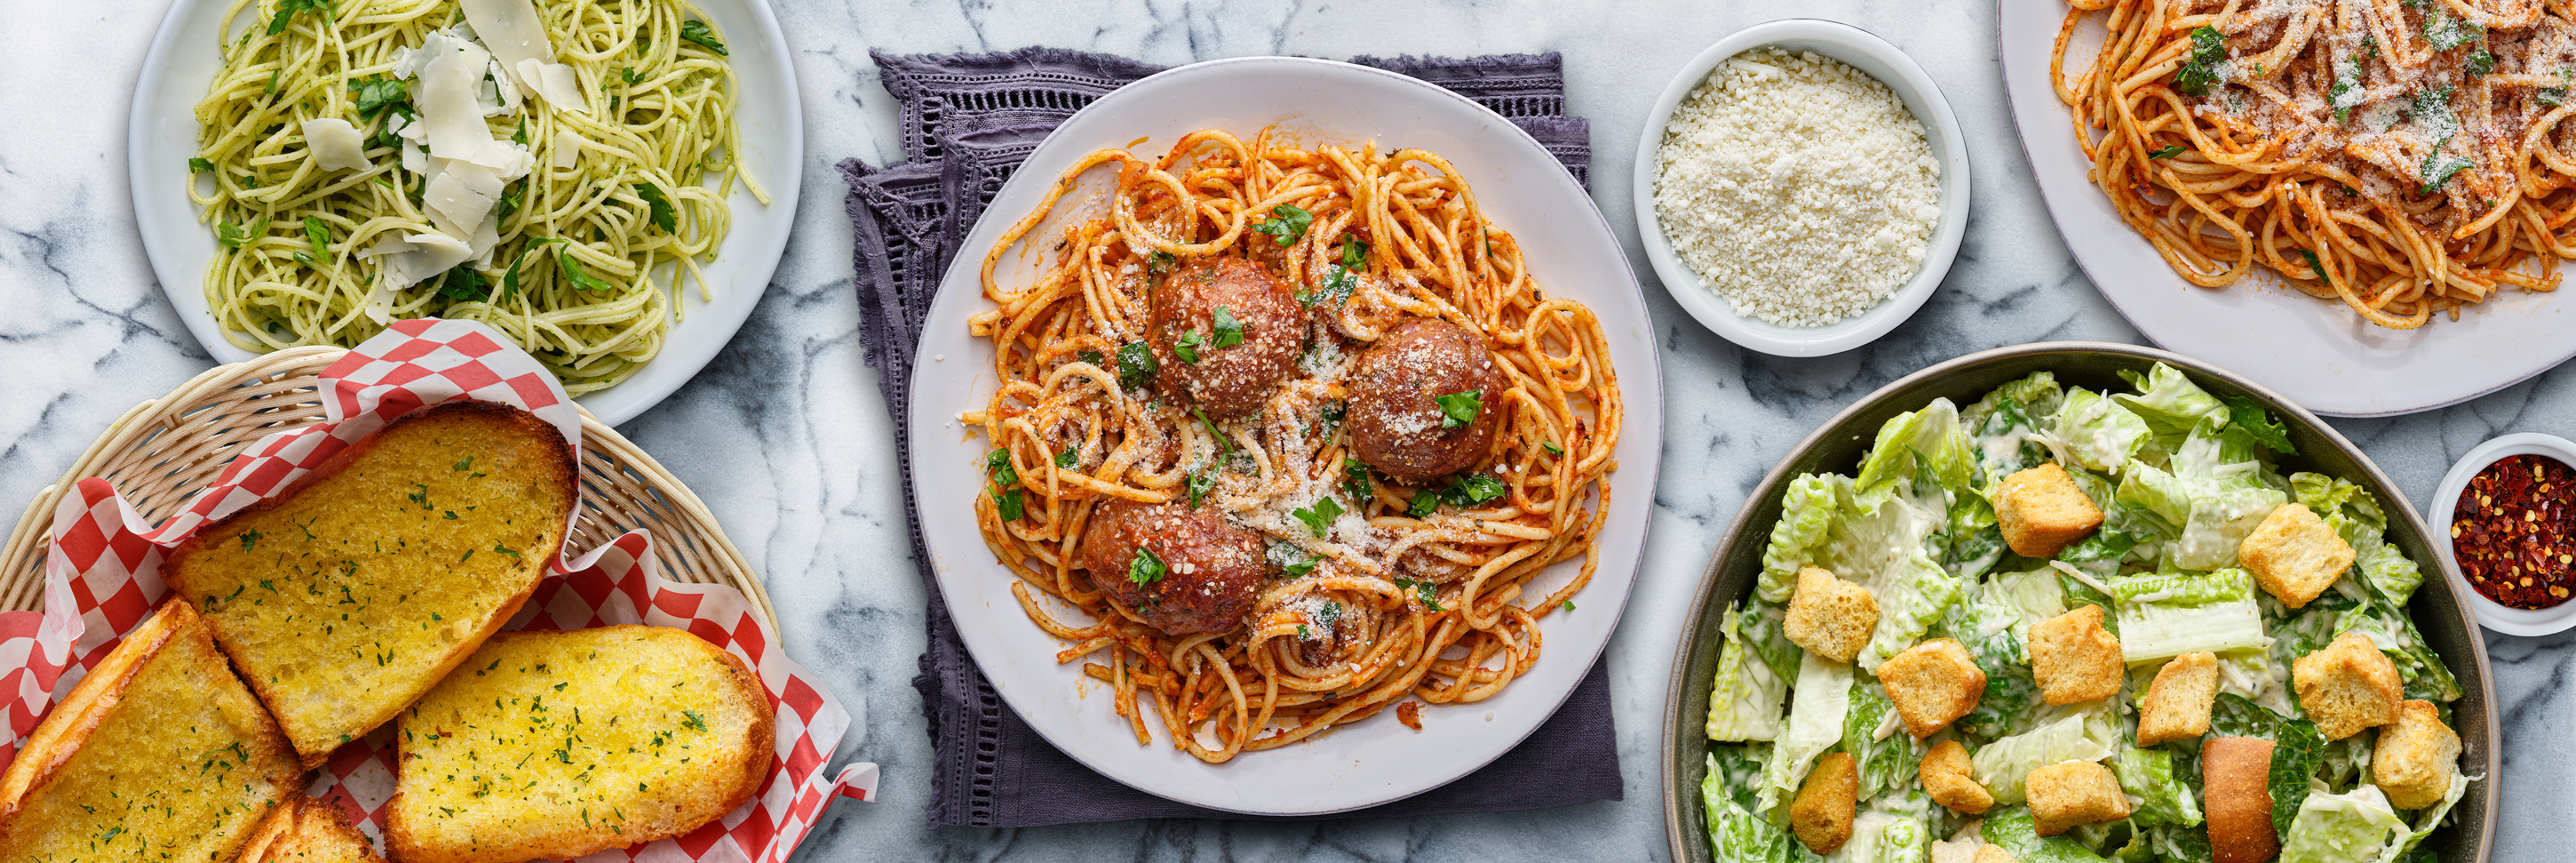 Spaghetti with Meatballs and Salad